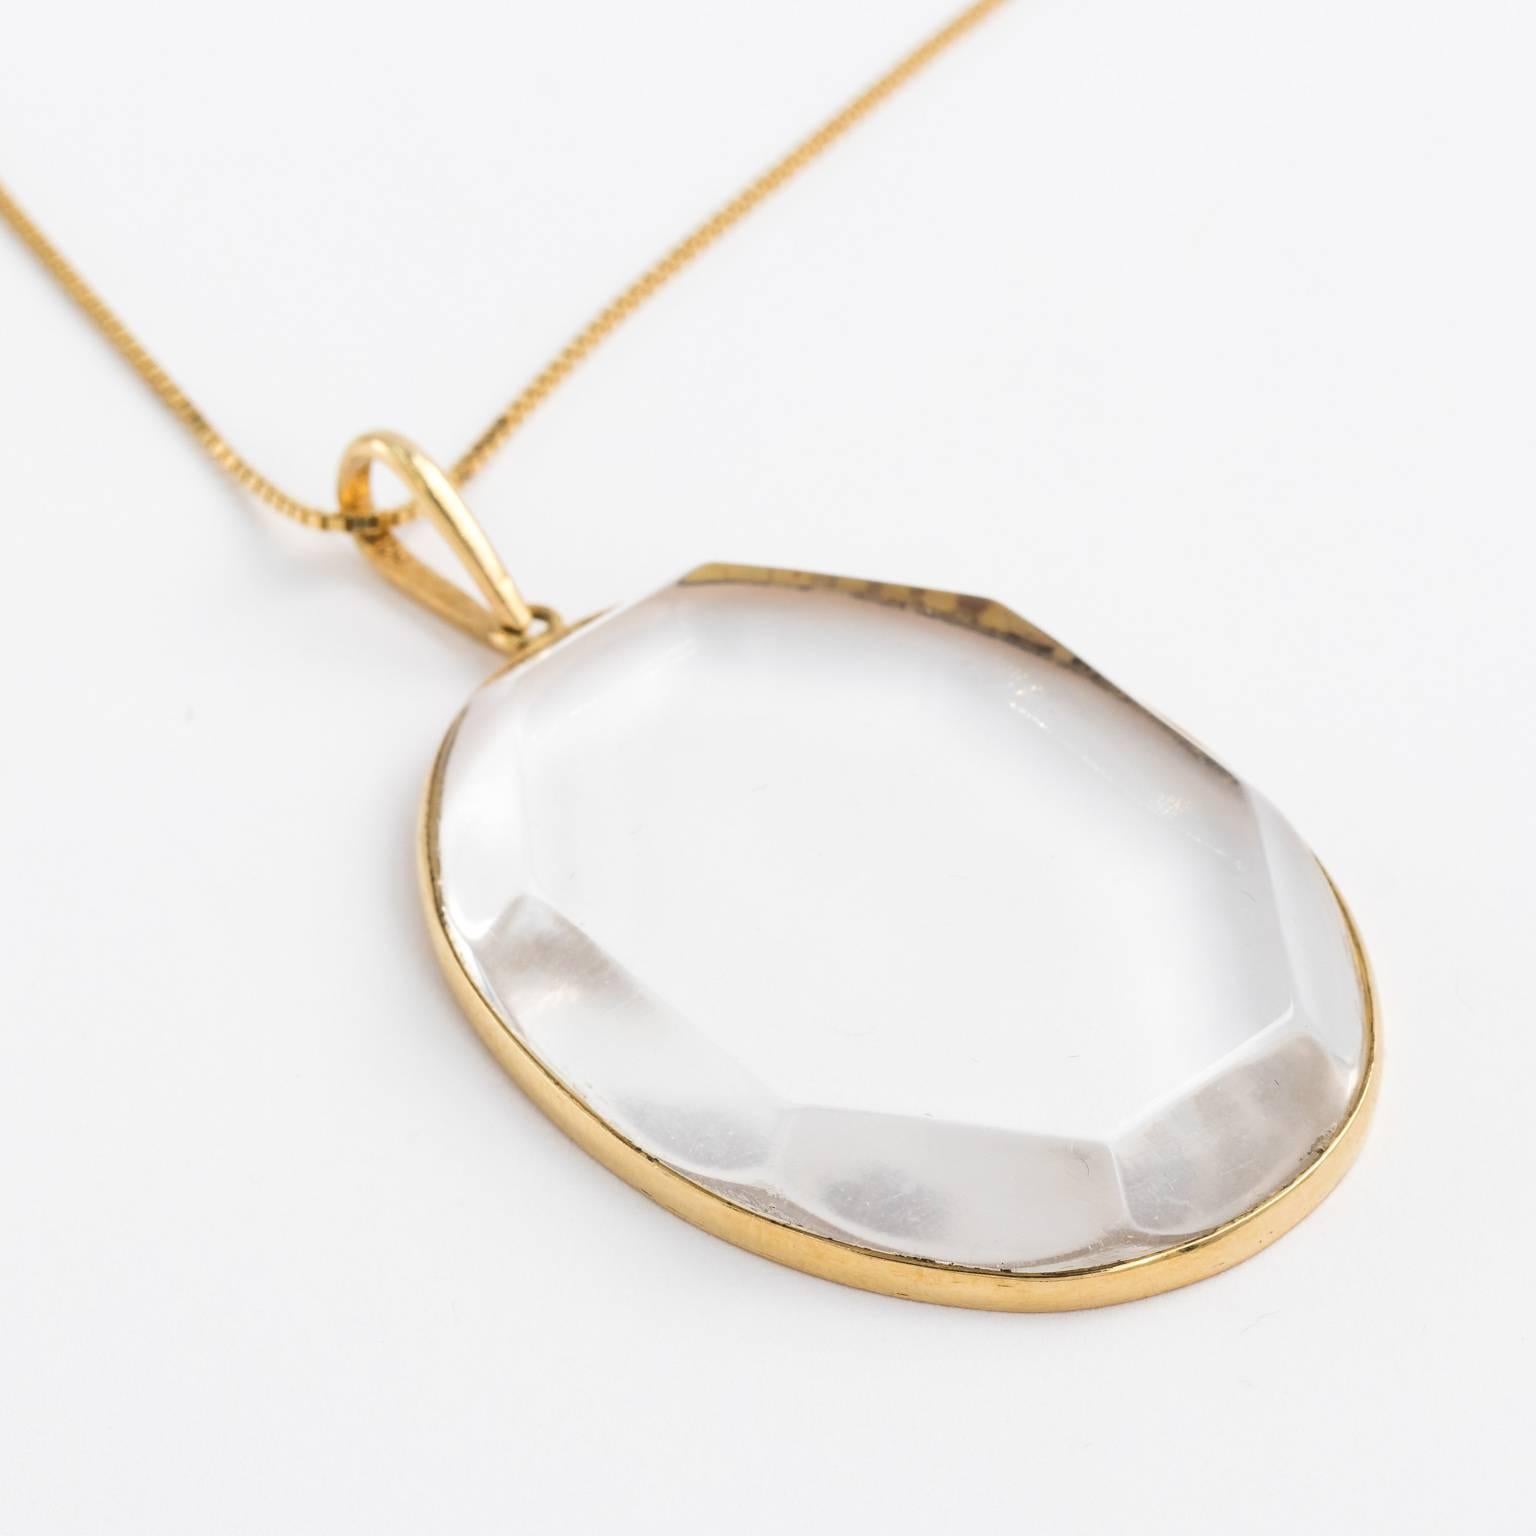 Modernist large crystal rock oval pendant in 18kt setting. The crystal has beveled edge in a hexagonal shape. Pendant come with matching 18kt long 30